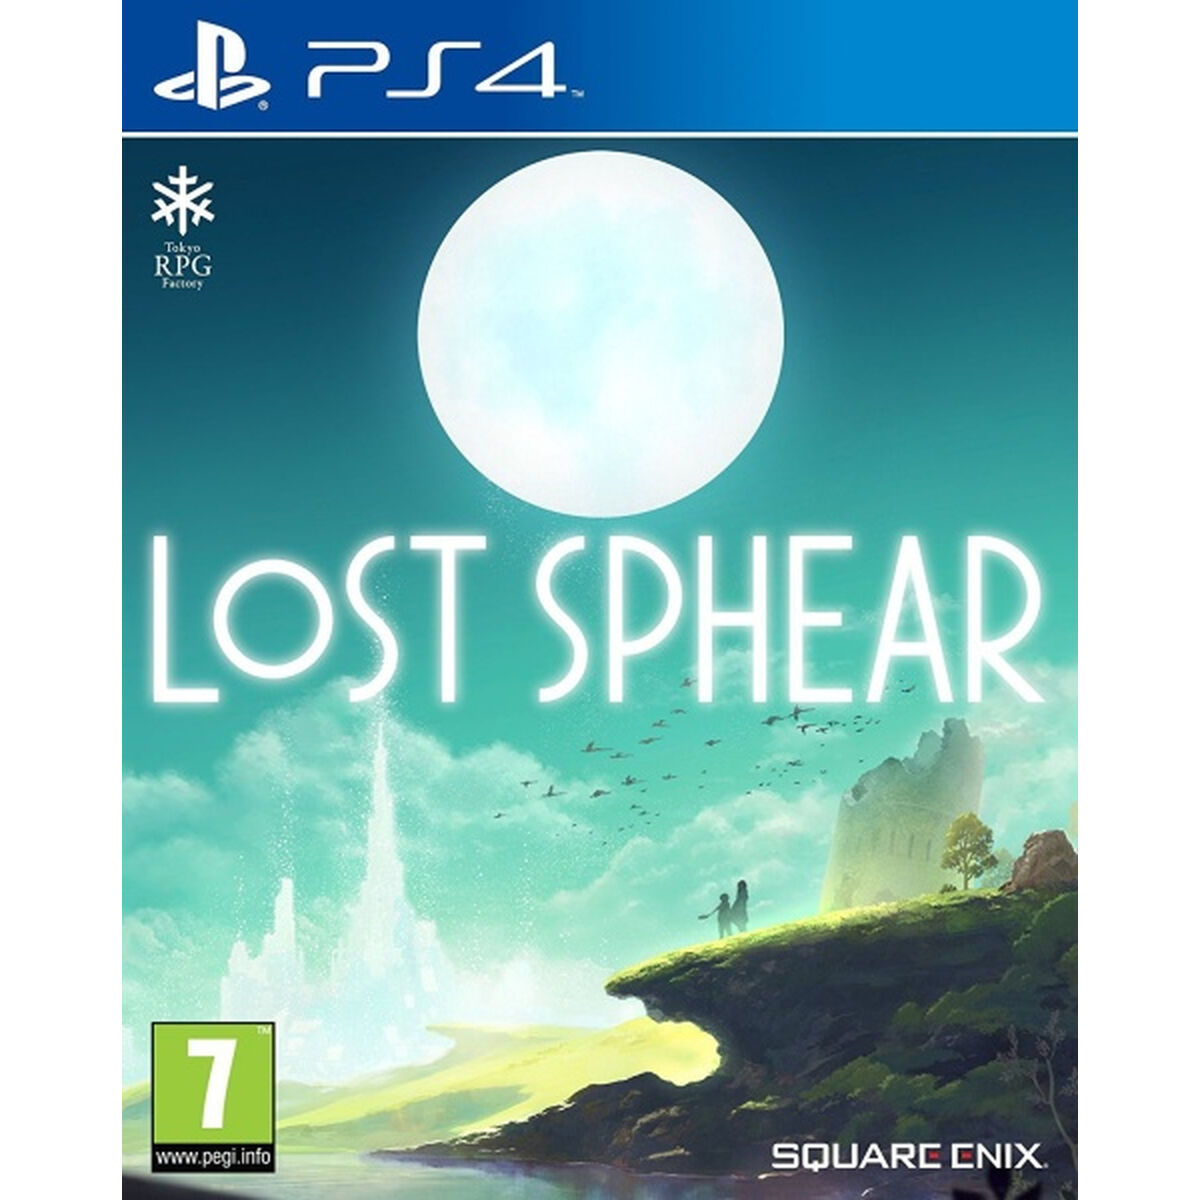 PlayStation 4 Video Game Sony Lost Sphear